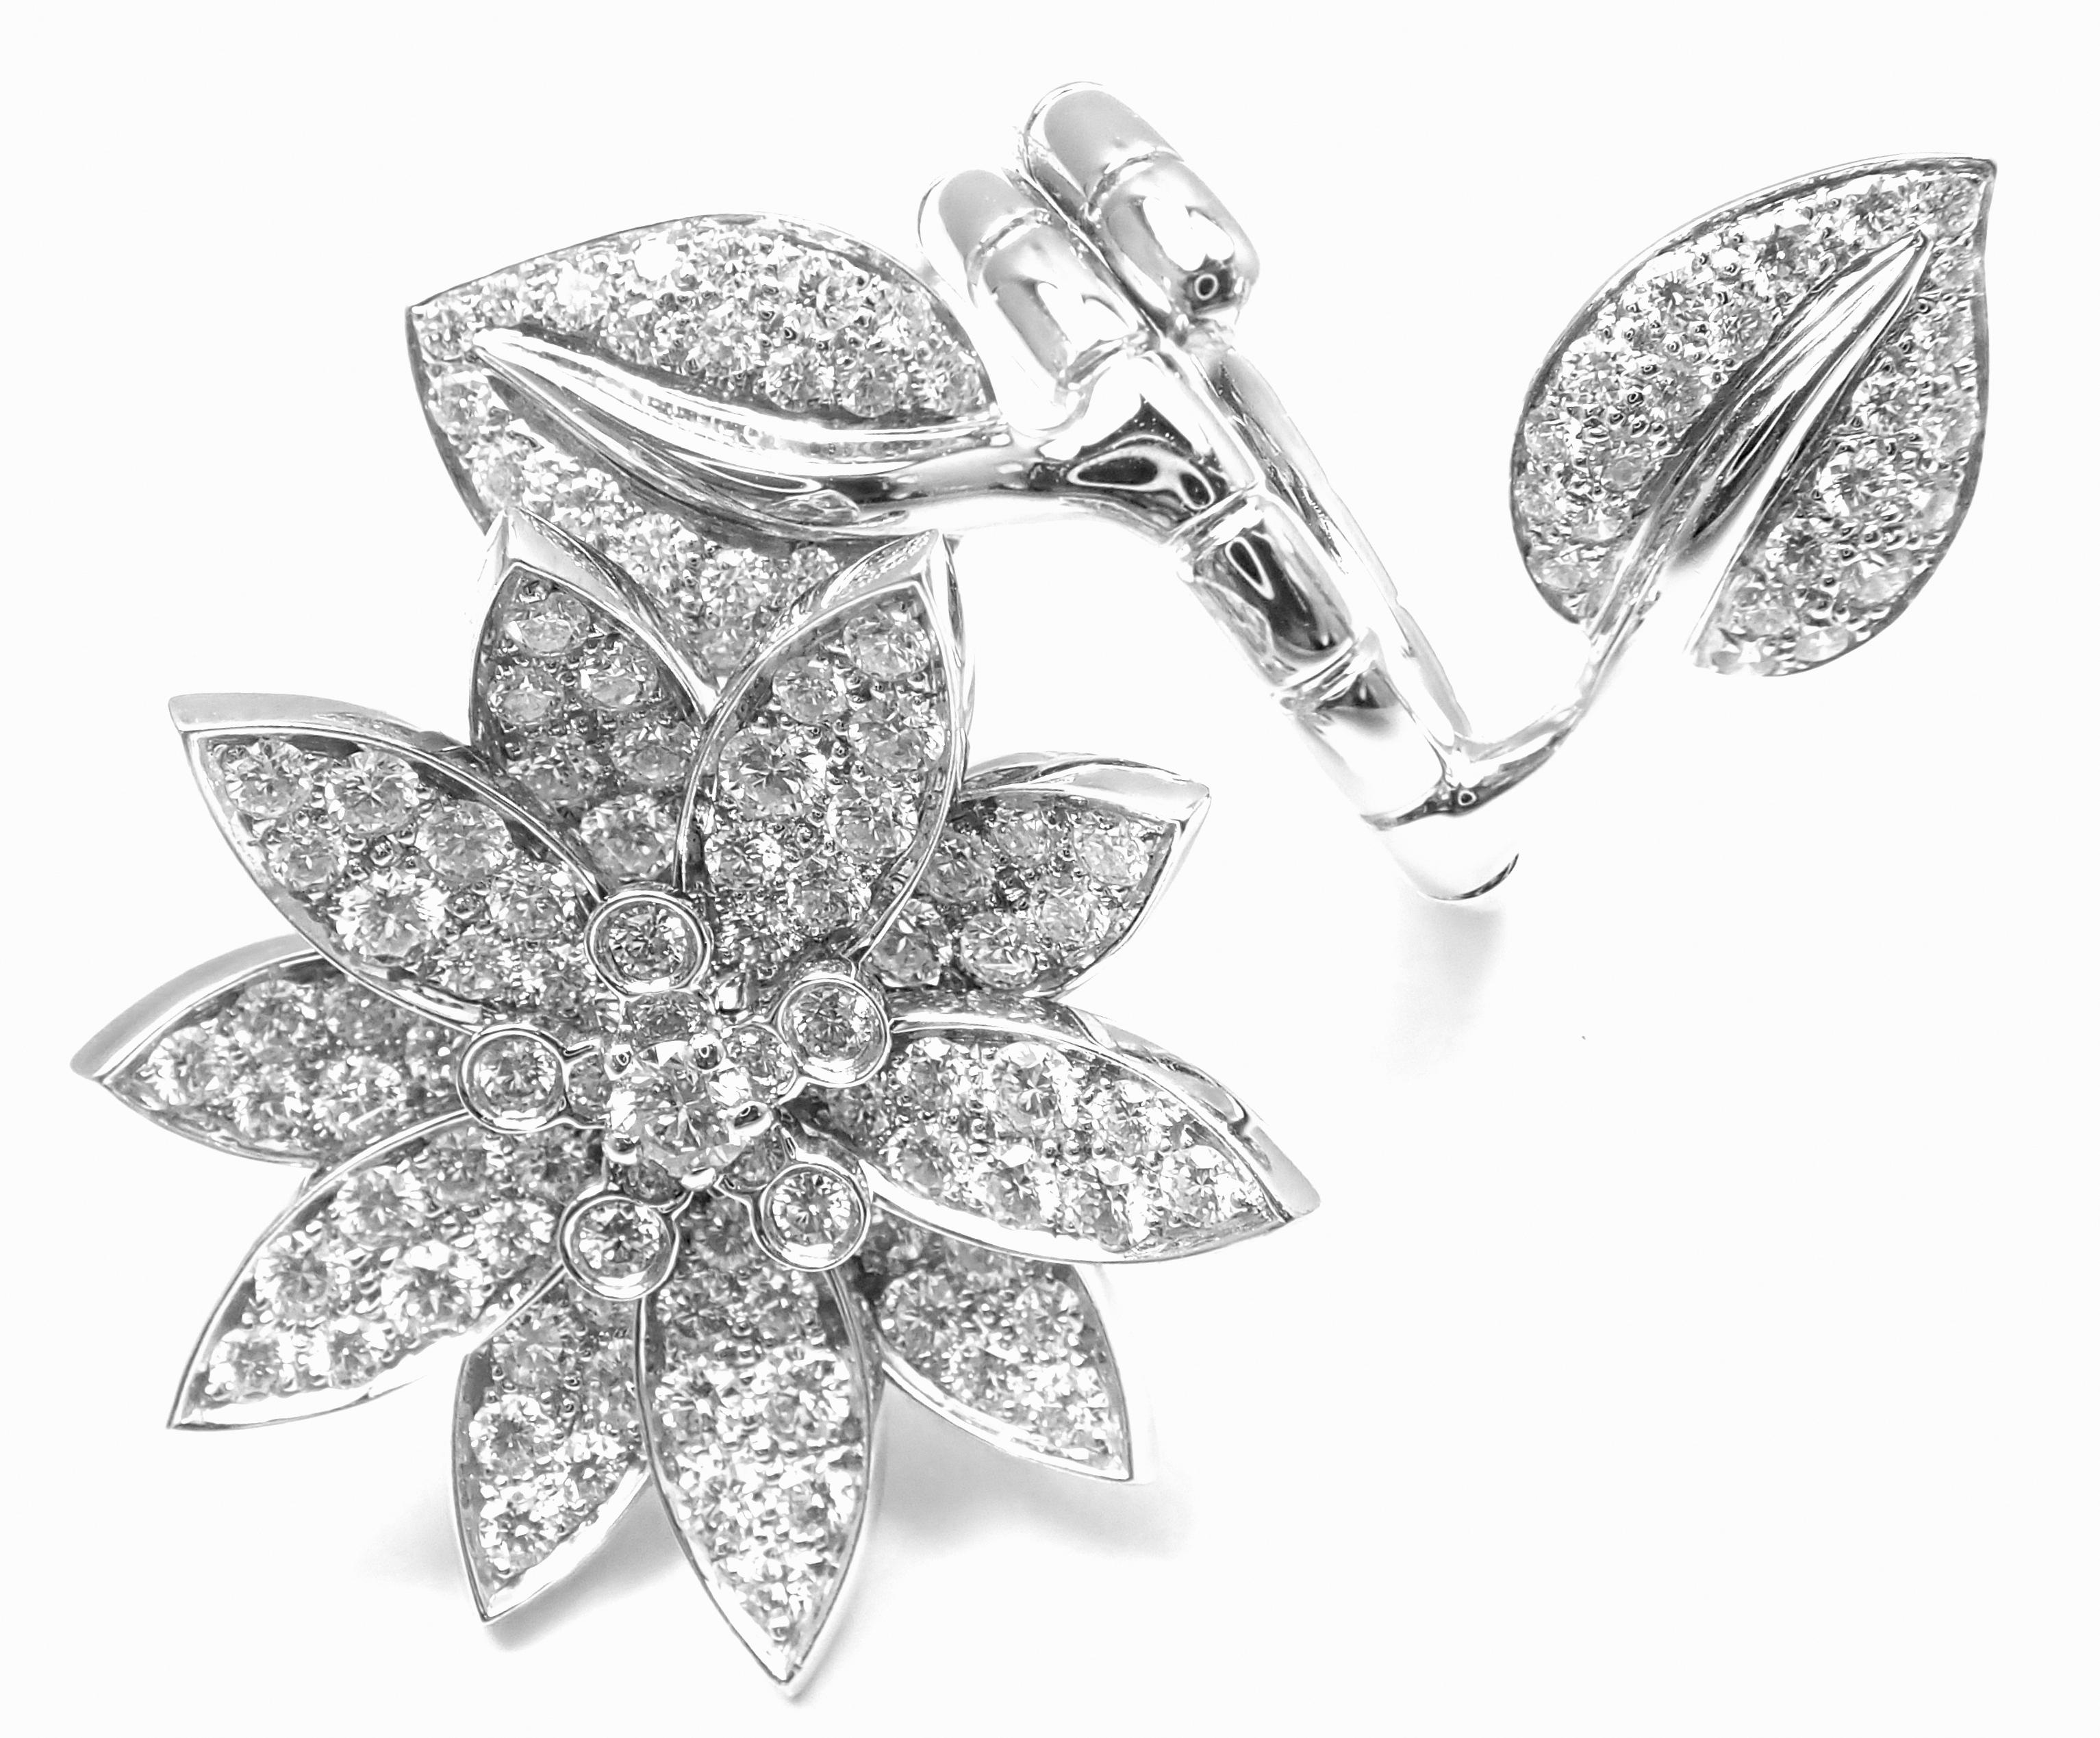 18k White Gold Lotus Flower Diamond Between The Finger Ring by Van Cleef & Arpels.  
With 127 round brilliant cut diamonds VVS1 clarity, E color
total weight approx. 2.13ct 
This ring comes with Van Cleef & Arpels box.  
Details:  
Weight: 20.5